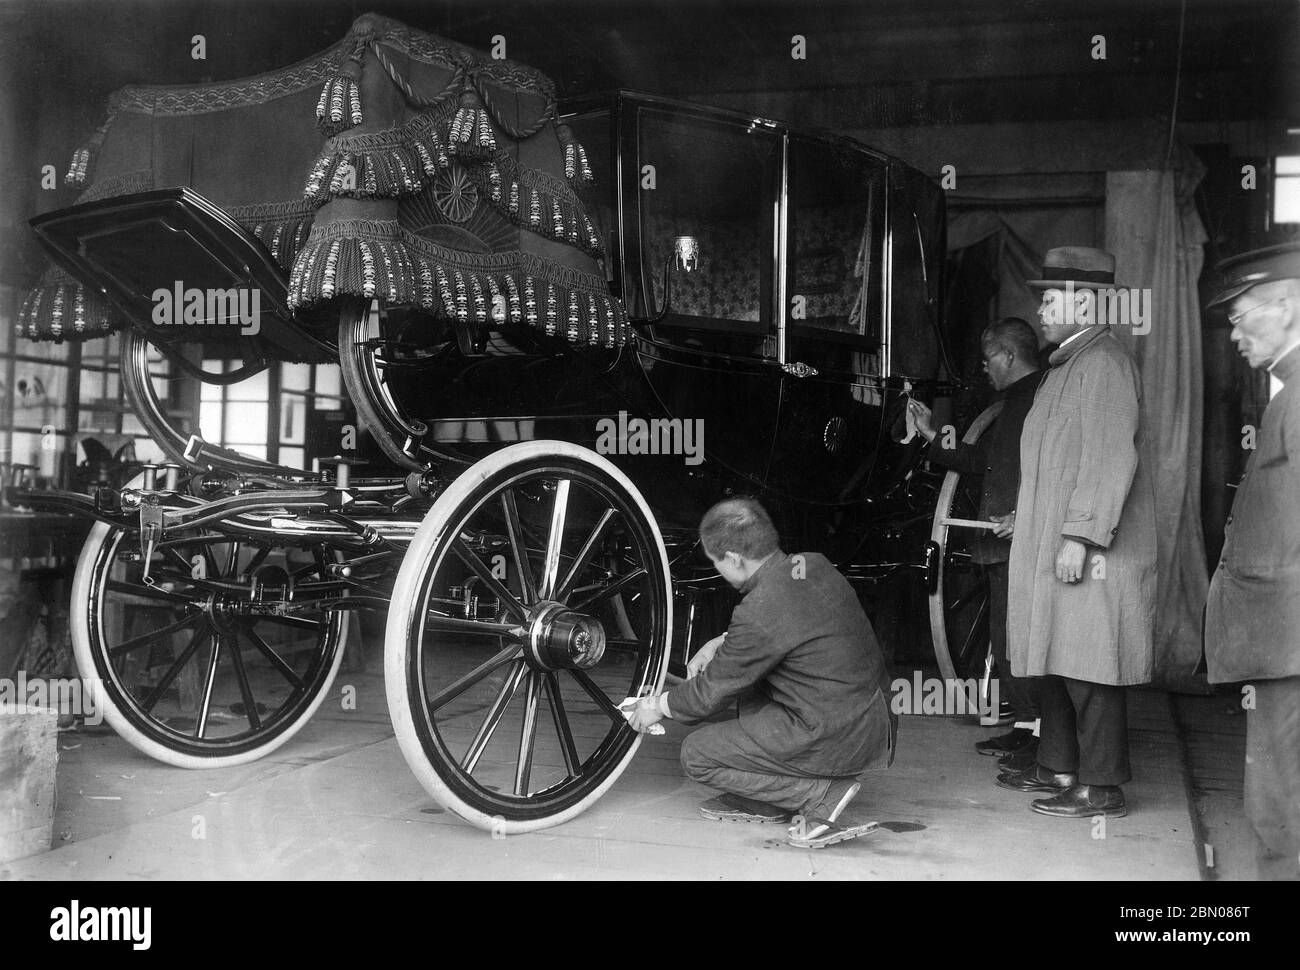 [ 1927 Japan - Imperial Funeral Preparations ] —   Men look on as a carriage is getting prepared for Emperor Taisho's funeral, January 1927 (Showa 2).  Emperor Taisho died of a heart attack on December 25 1926 (Taisho 15).  His funeral, held at night, consisted of a 6 kilometer long procession along a route lit with wood fires in iron lanterns. Some 20,000 mourners followed an ox-drawn cart containing the imperial coffin.  20th century gelatin silver print. Stock Photo